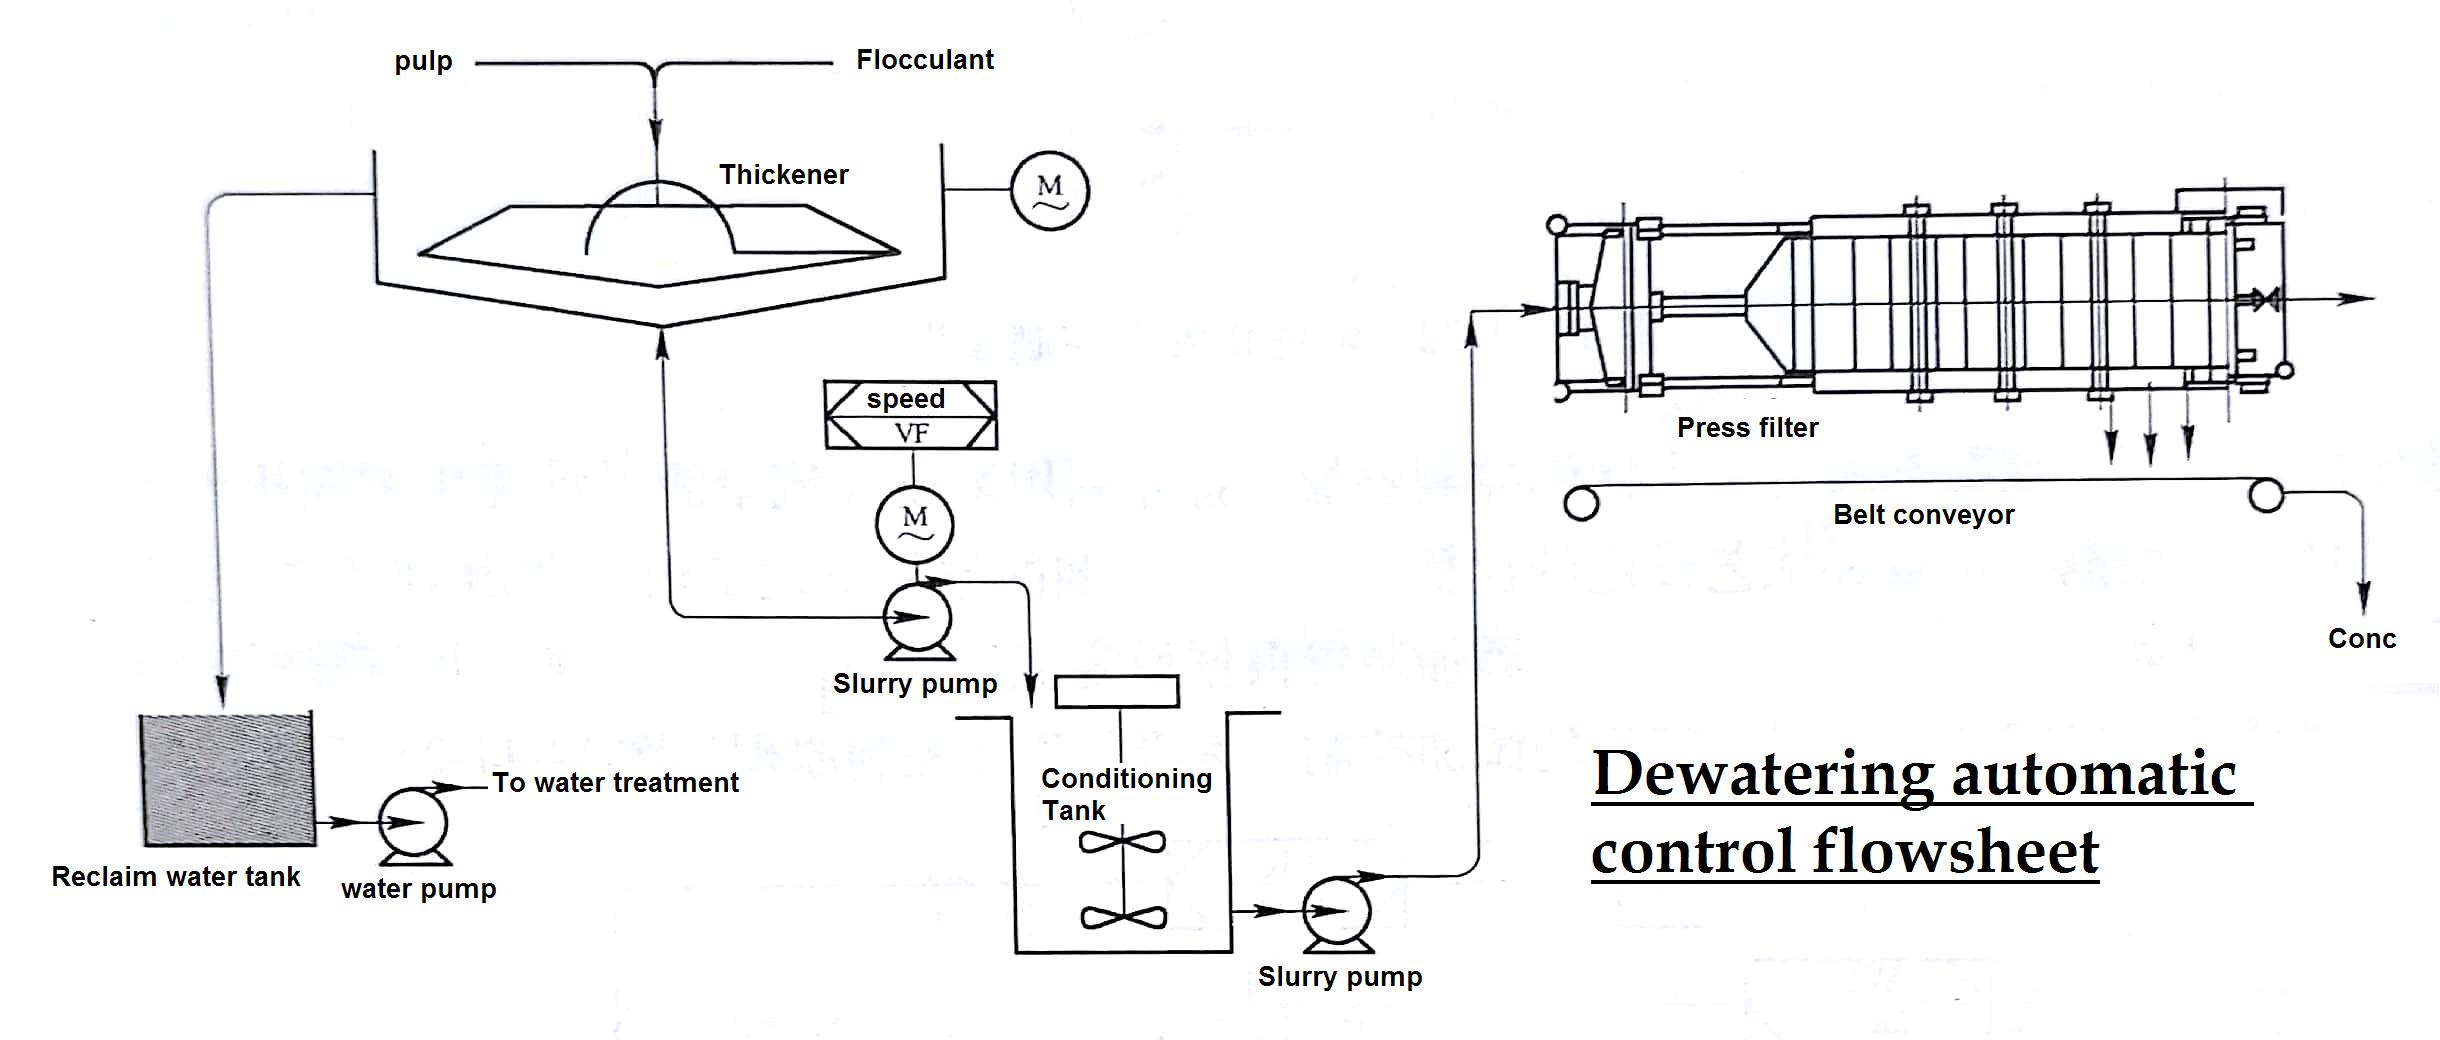 Flowsheet of thickening process